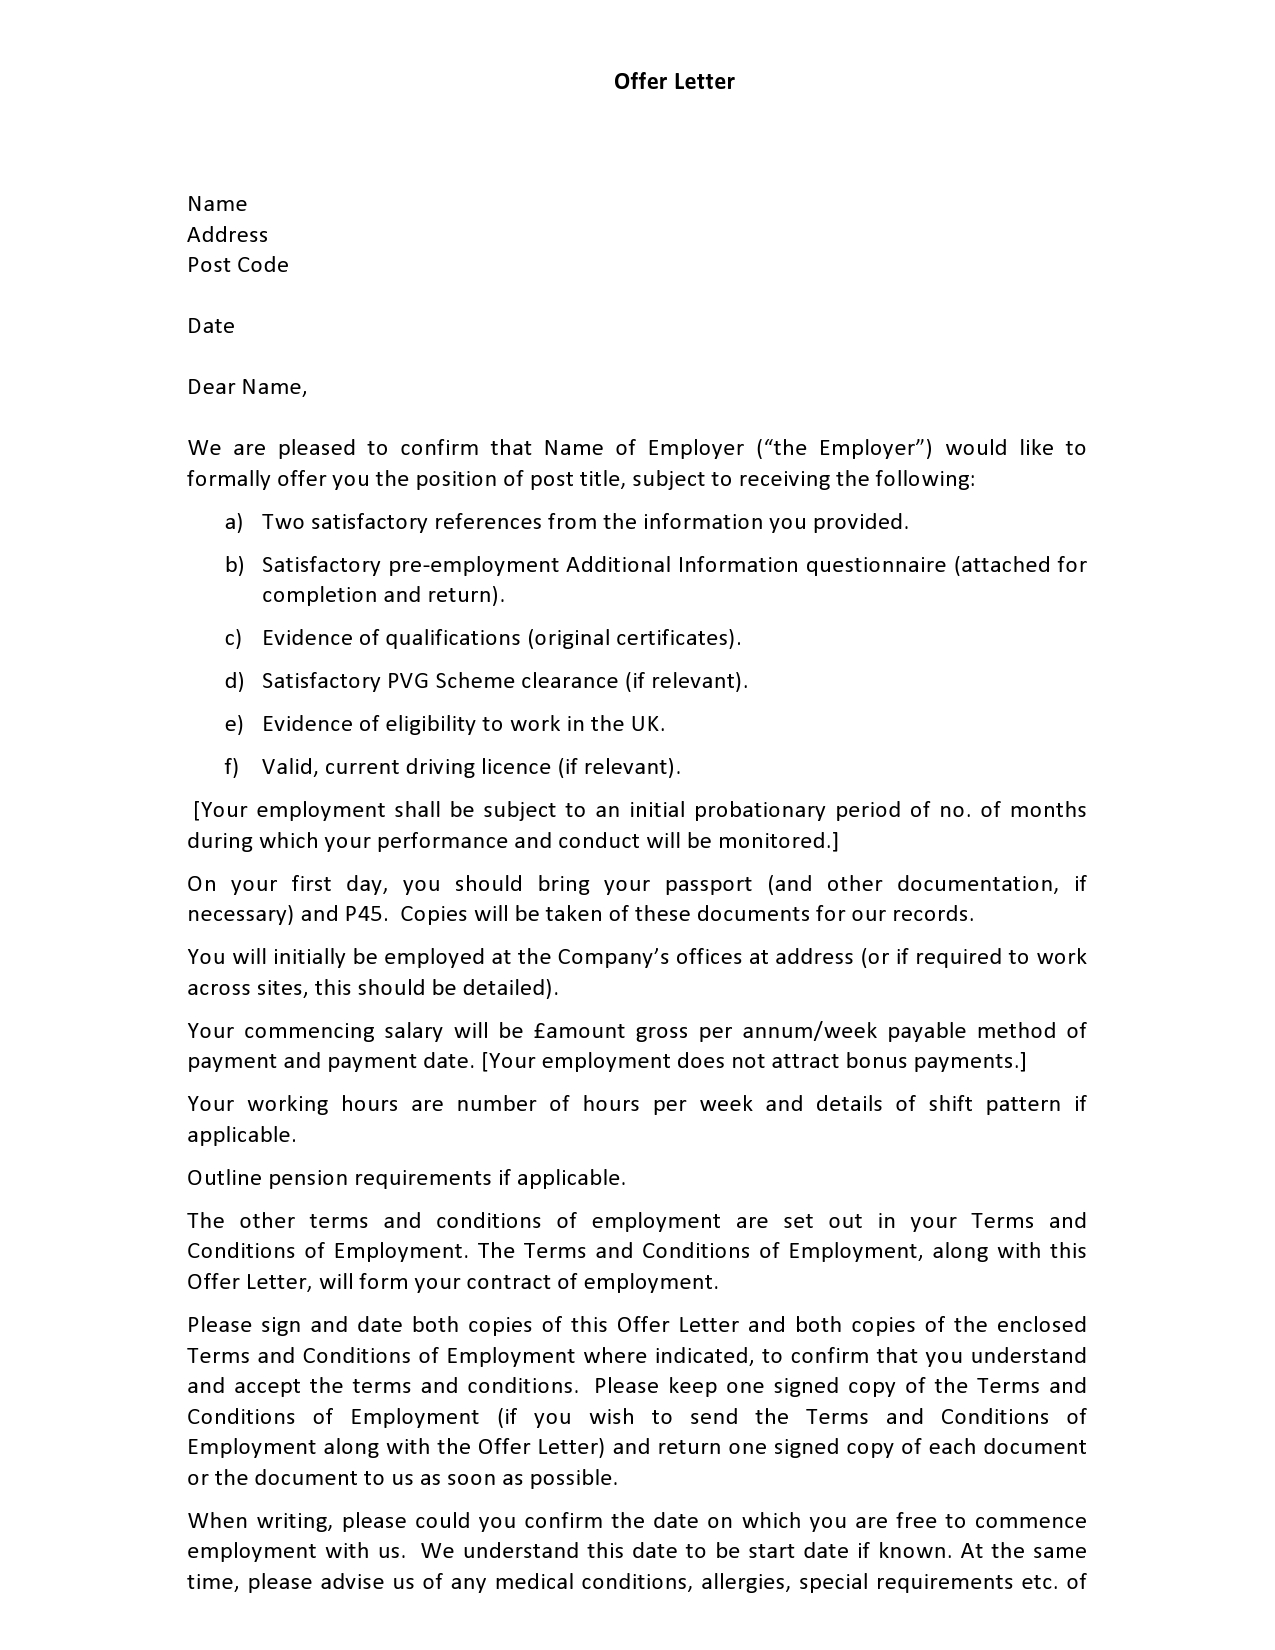 Free employment offer letter template 27